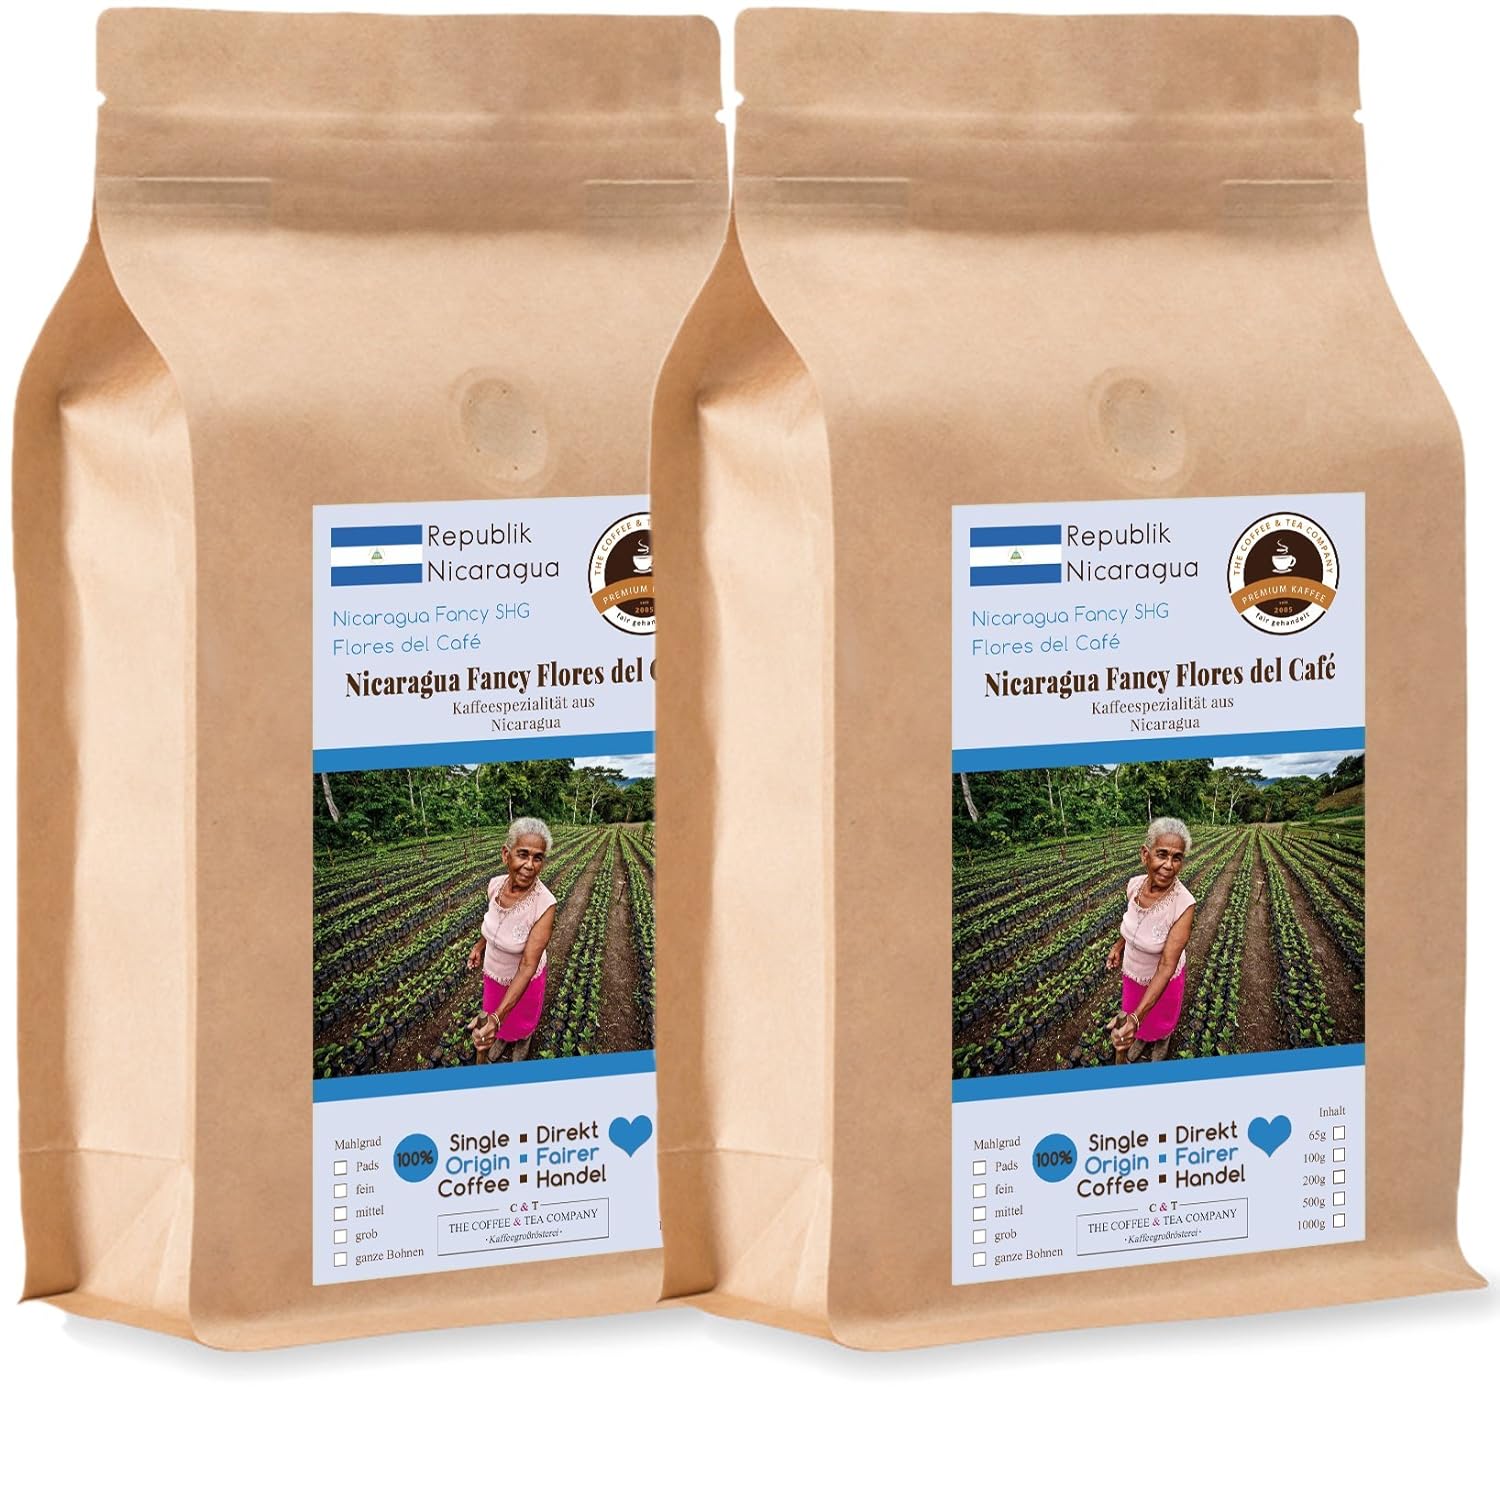 Coffee Globetrotter - Coffee with Heart - Nicaragua Fancy Flores del Café - 2 x 1000 g Finely Ground - for Fully Automatic Coffee Grinder - Roasted Coffee Fair Trade | Refill Pack Economy Pack